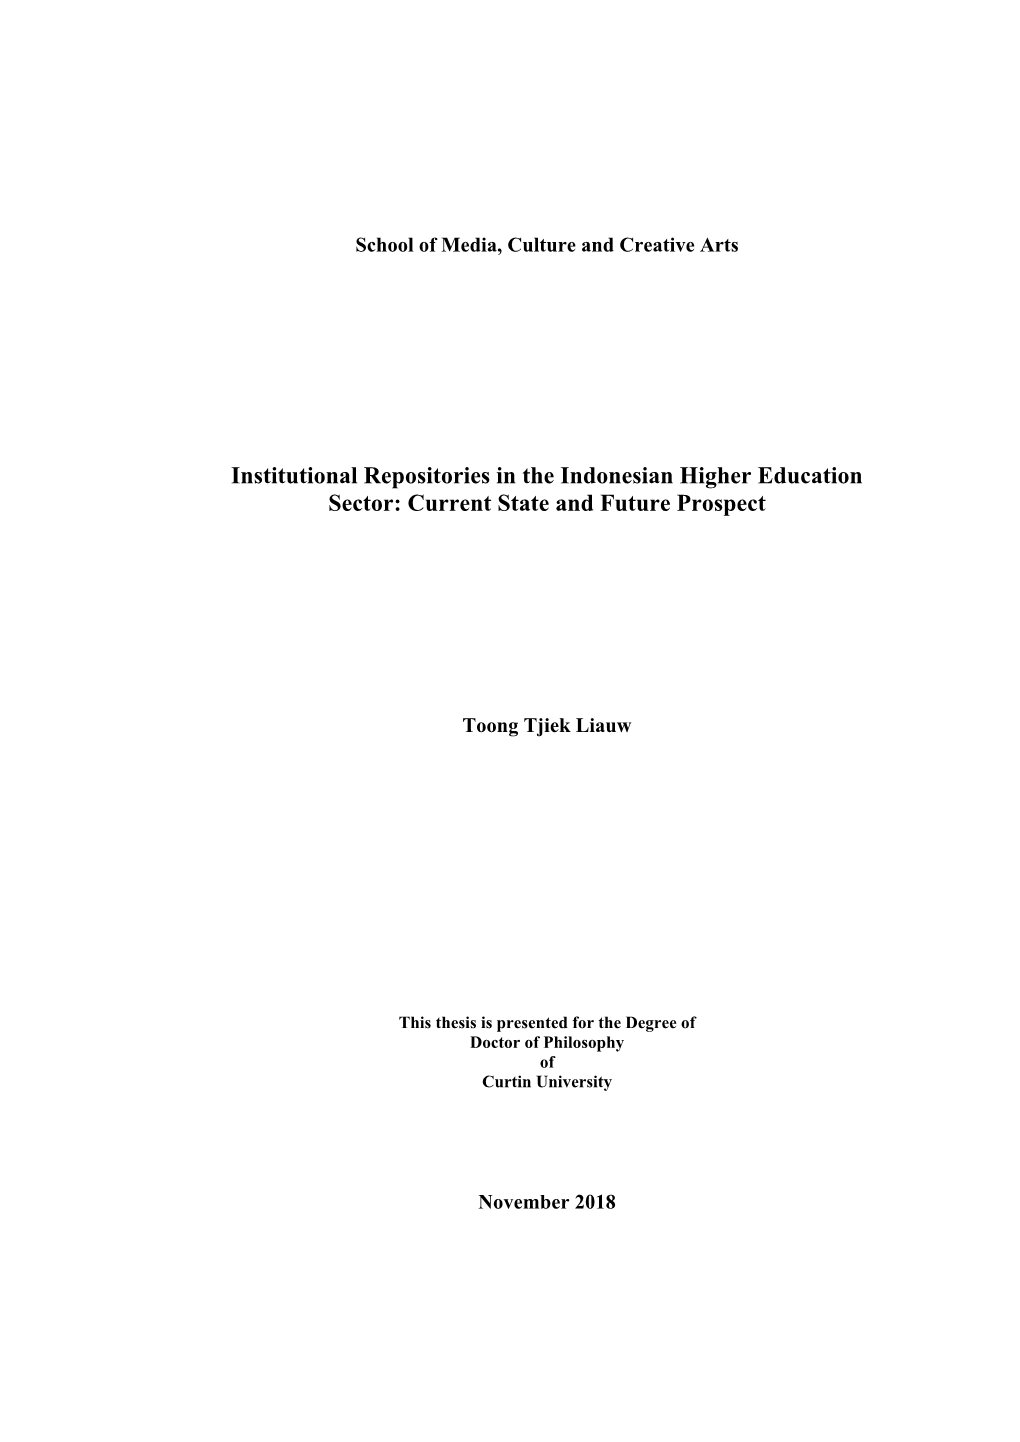 Institutional Repositories in the Indonesian Higher Education Sector: Current State and Future Prospect